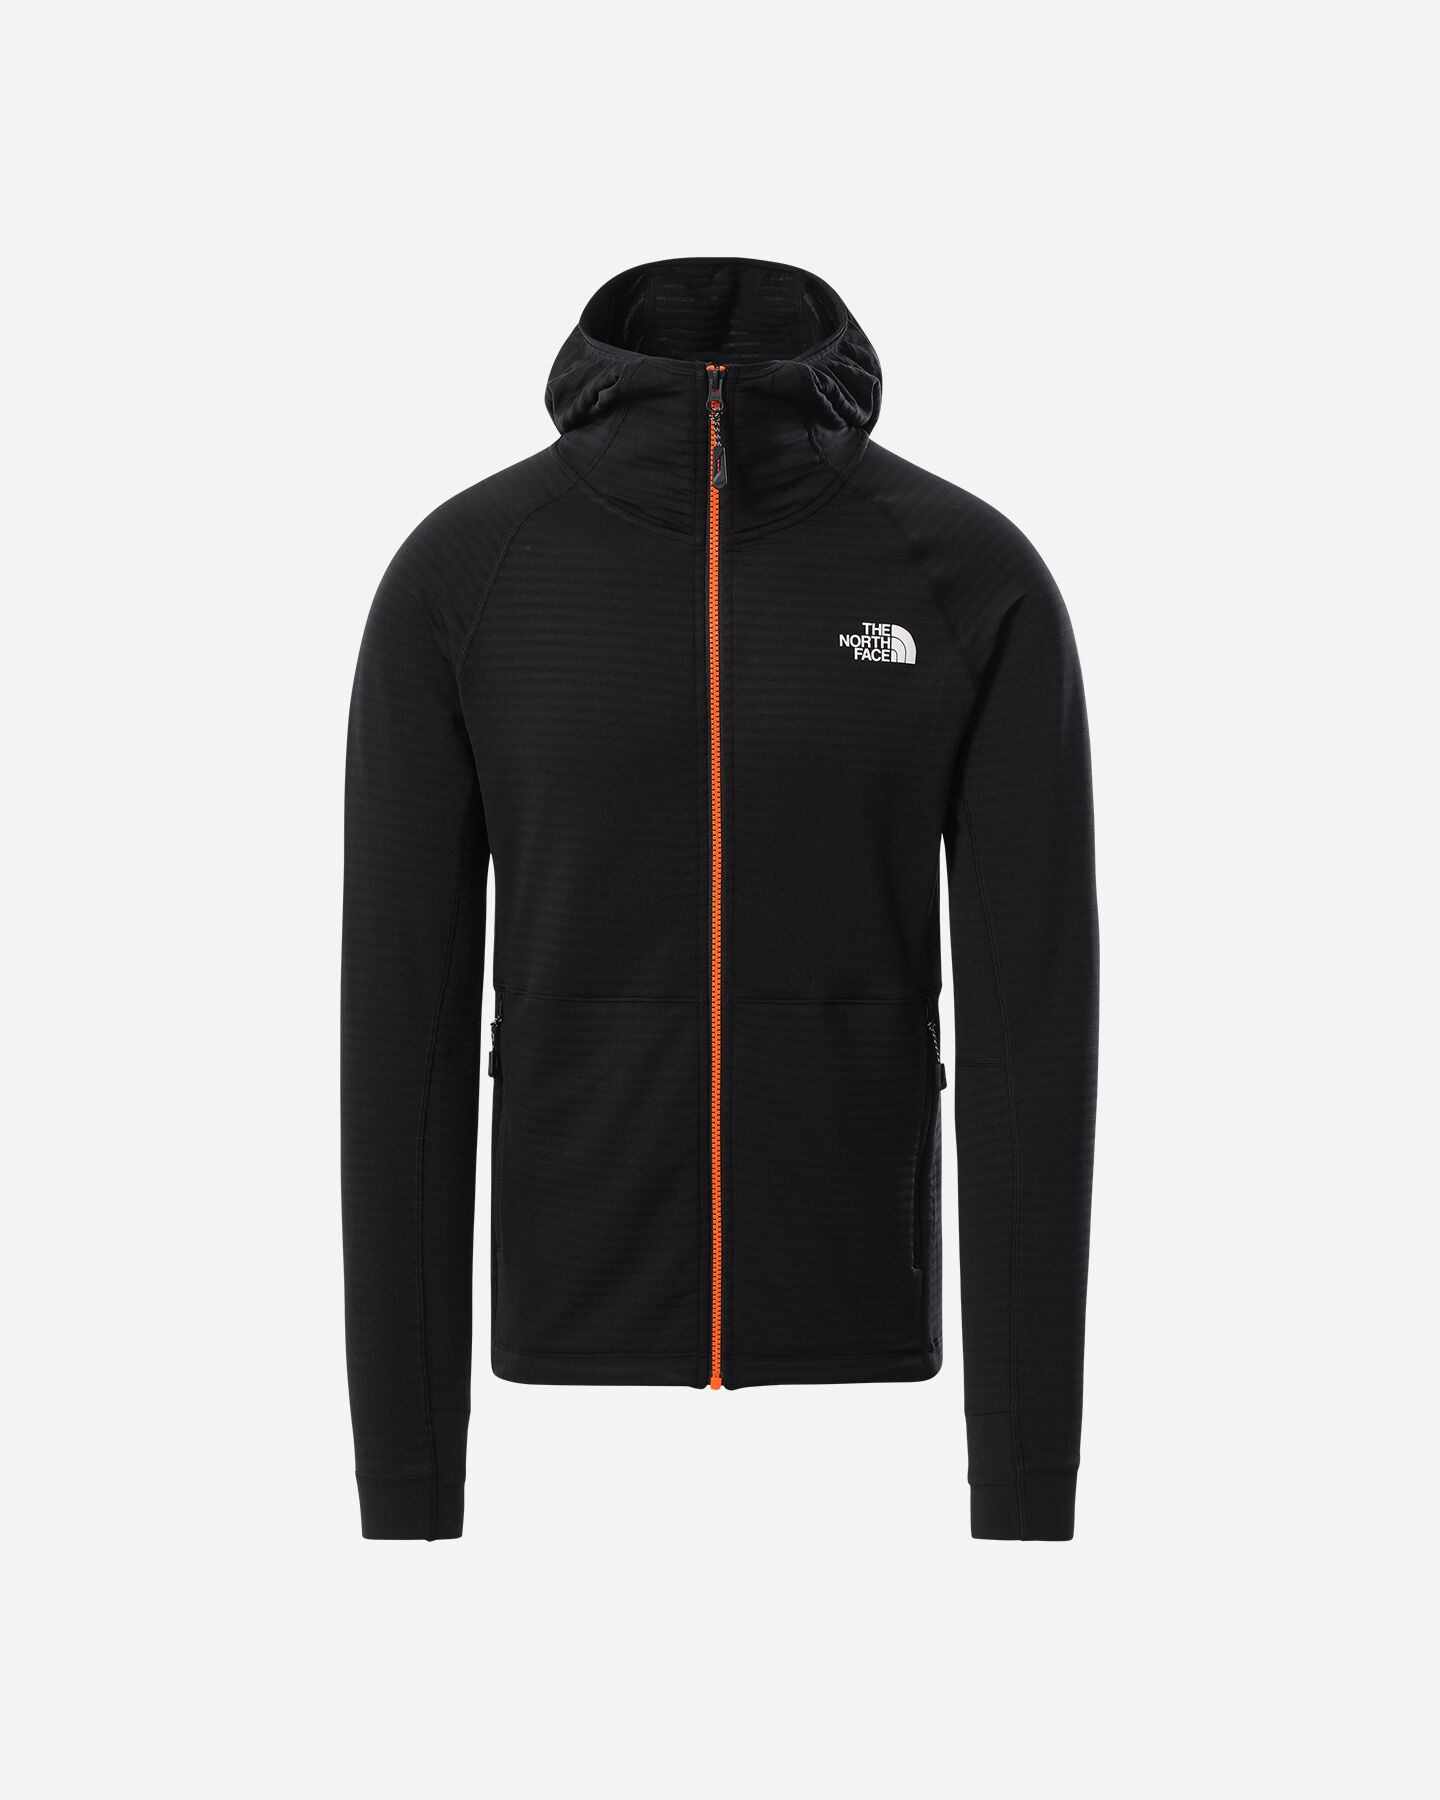  Pile THE NORTH FACE CIRCADIAN HD M S5293209|JK3|S scatto 0